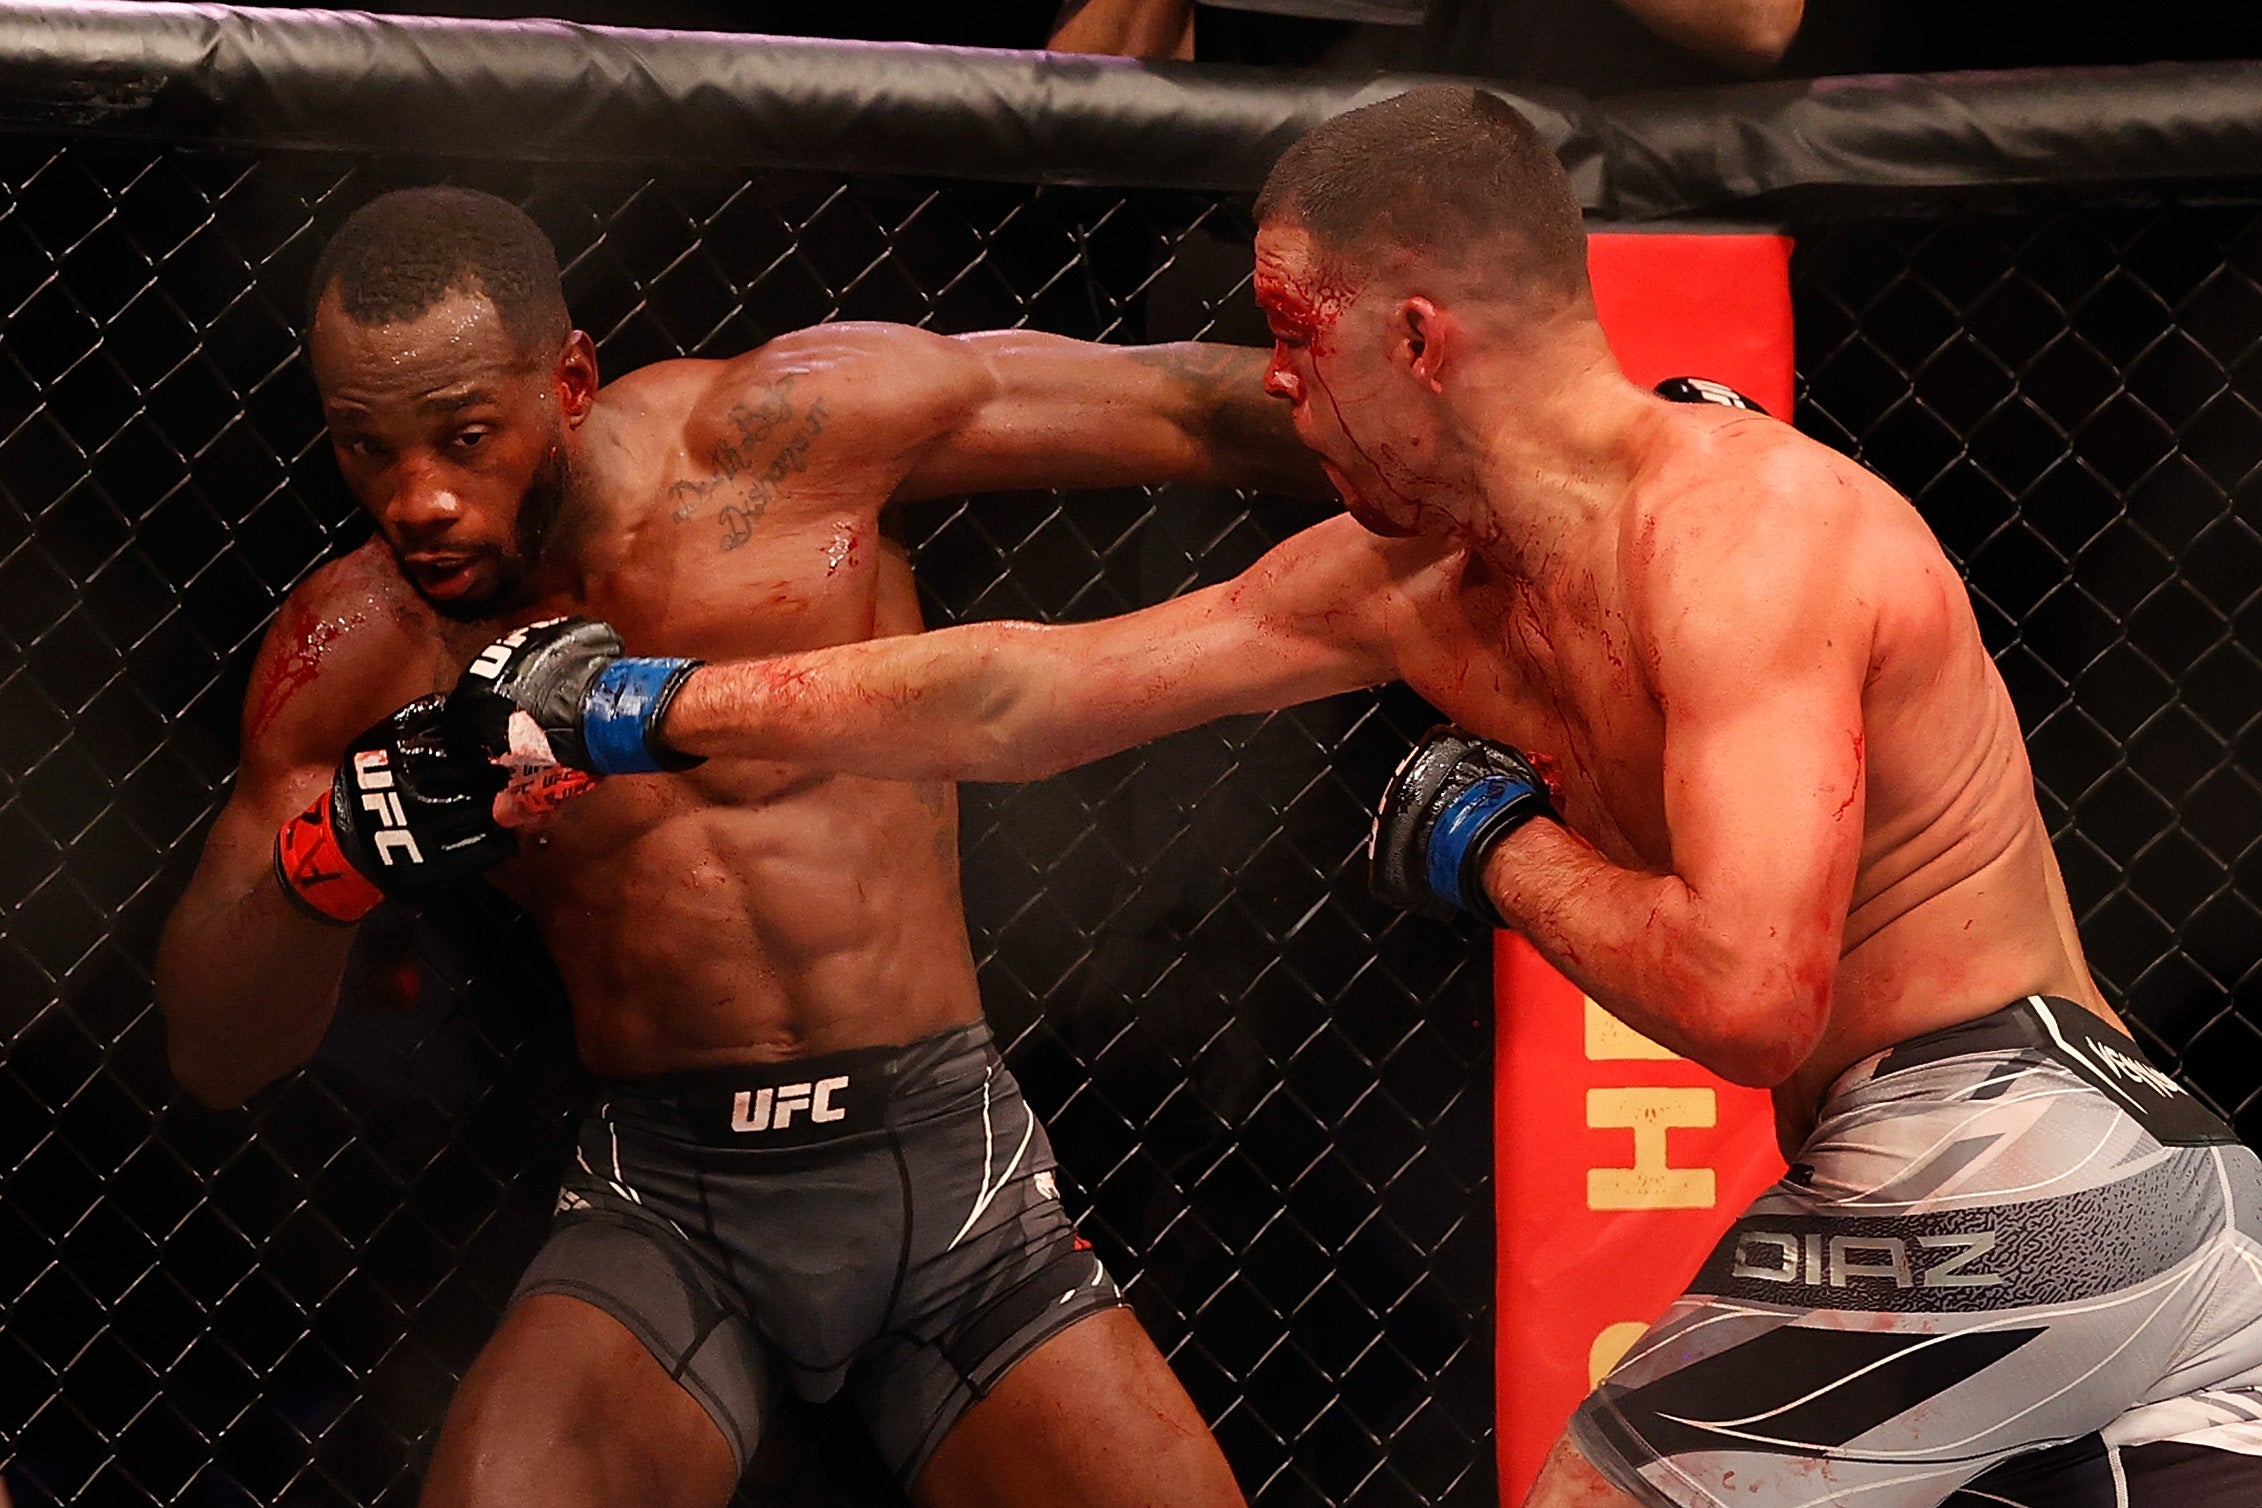 Leon Edwards survives a late rally by Nate Diaz